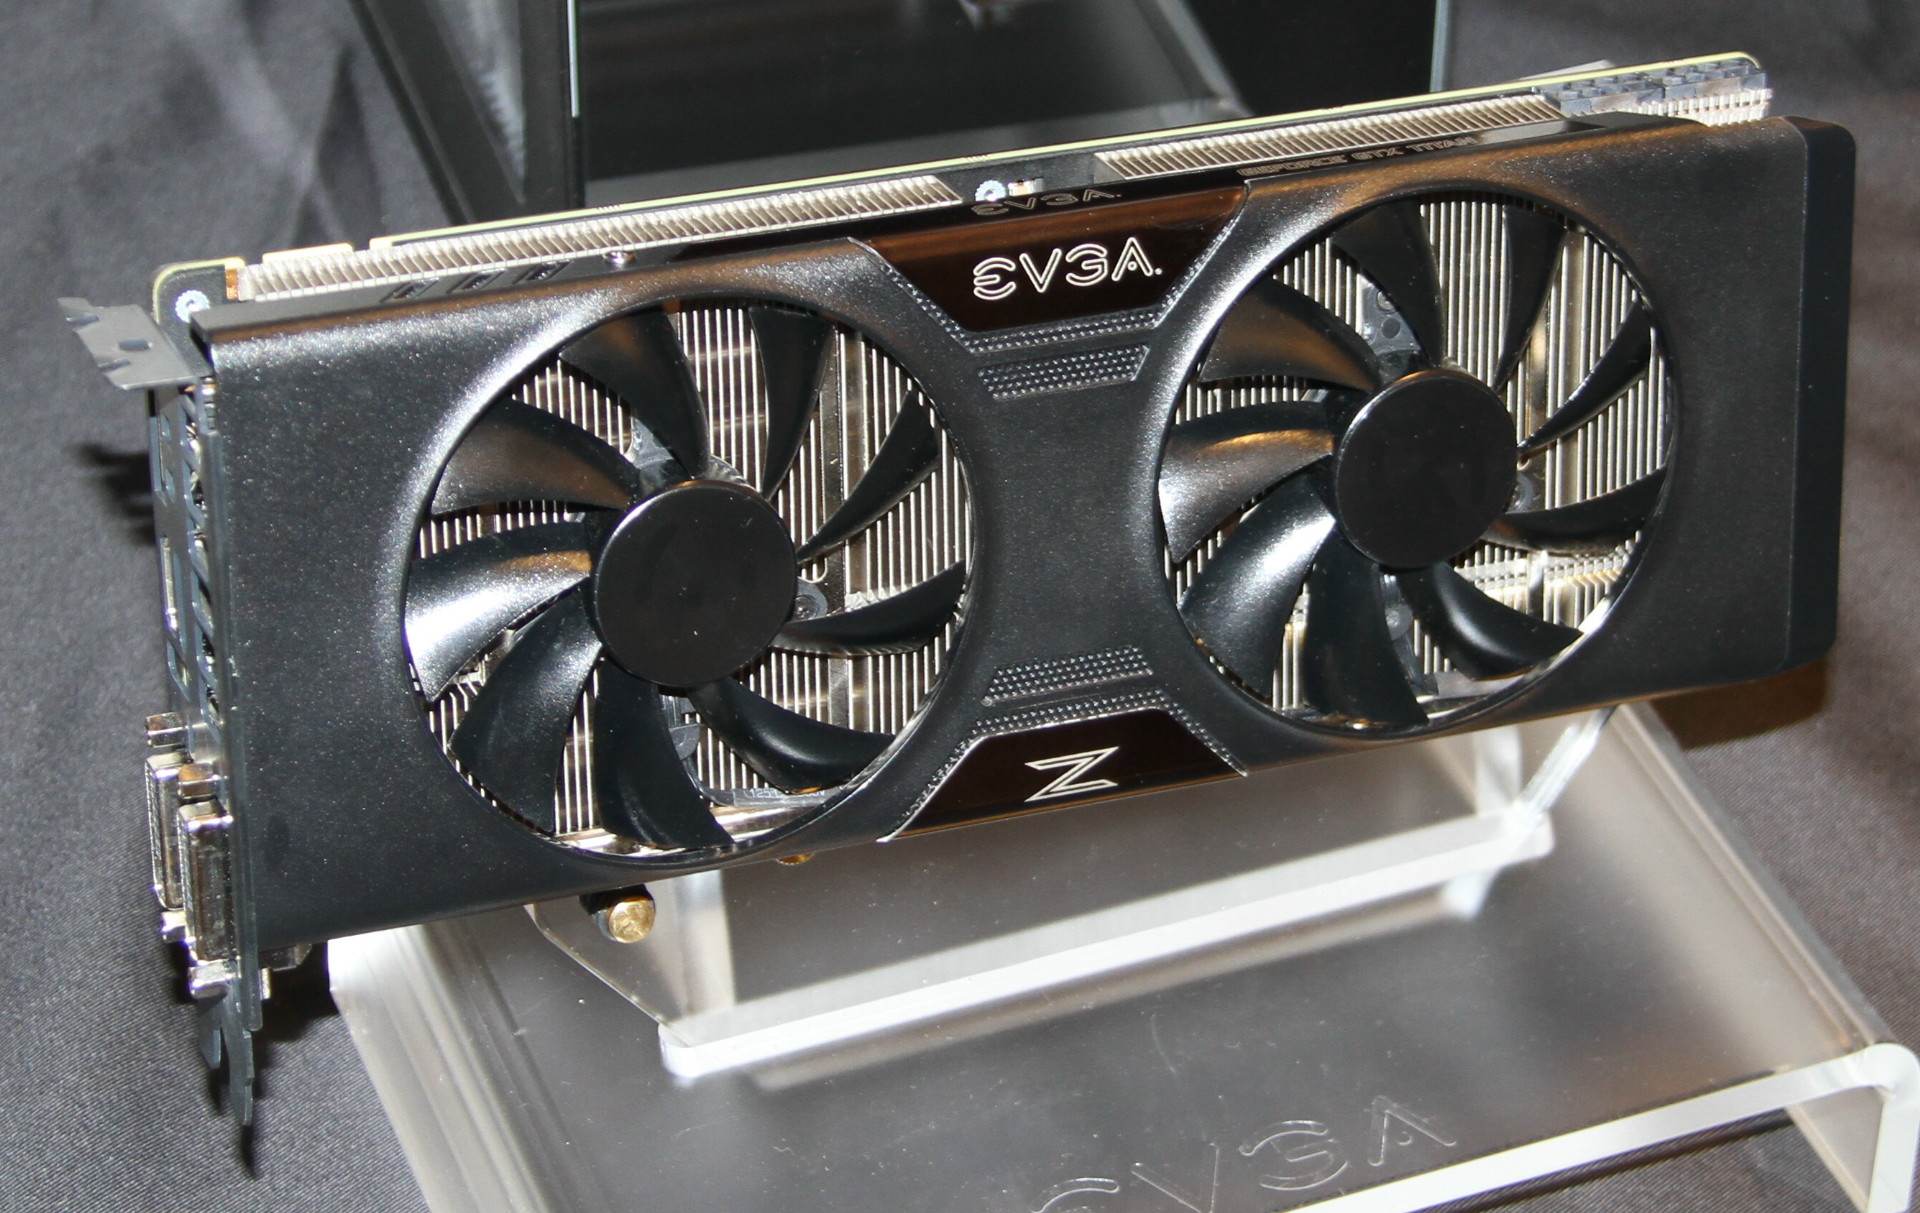 Evga Geforce Gtx Titan Z With Acx Cooler Spotted At Computex Images, Photos, Reviews